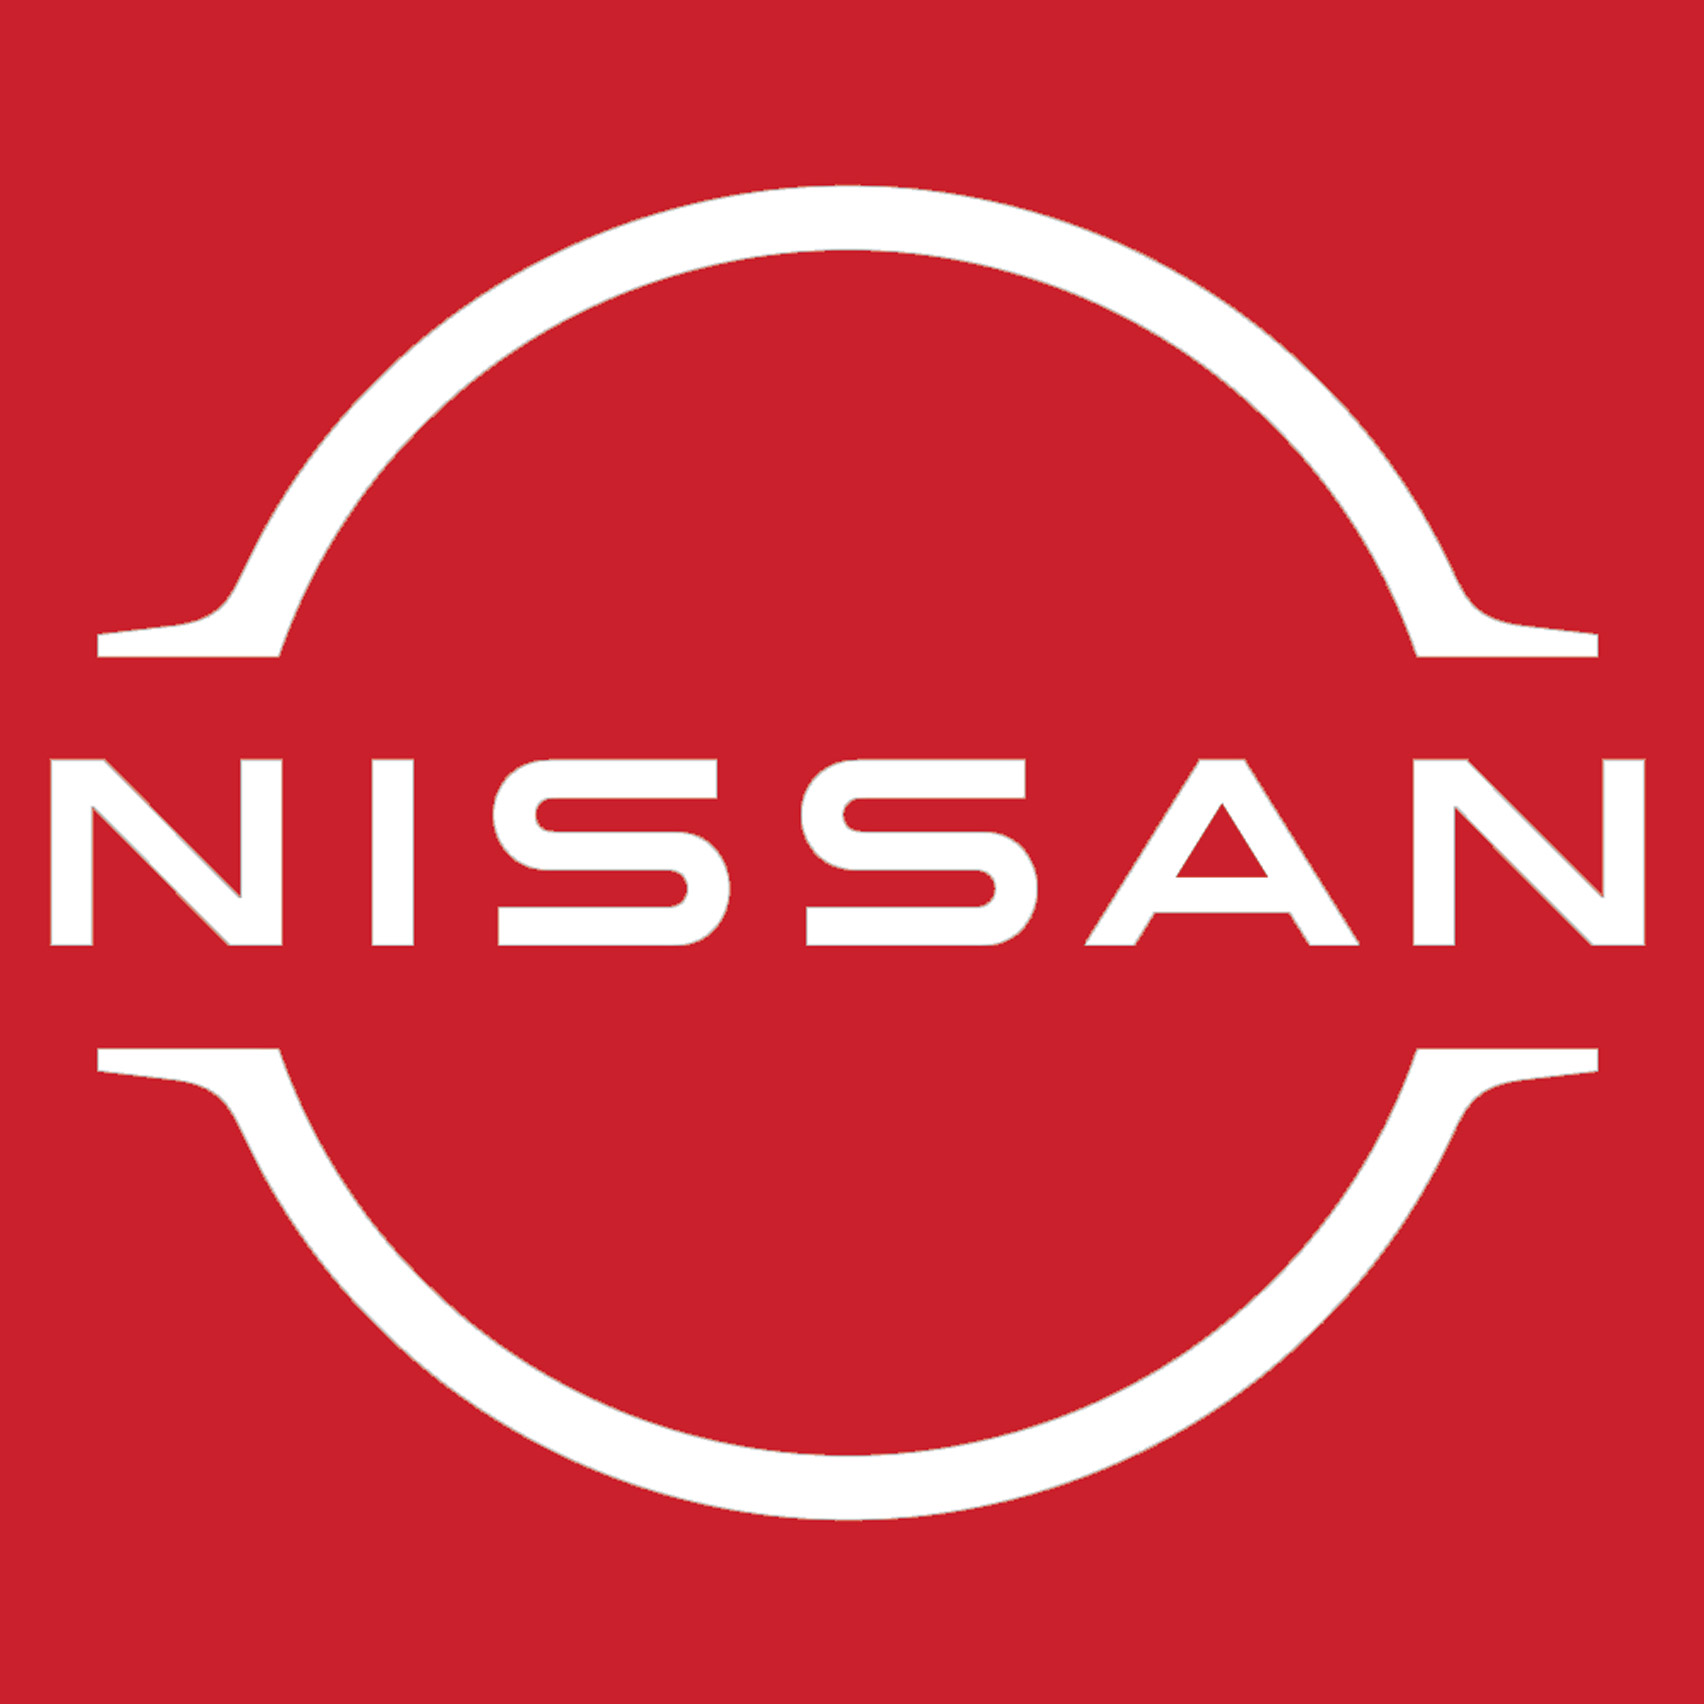 Nissan latest automotive brand to roll out flat logo